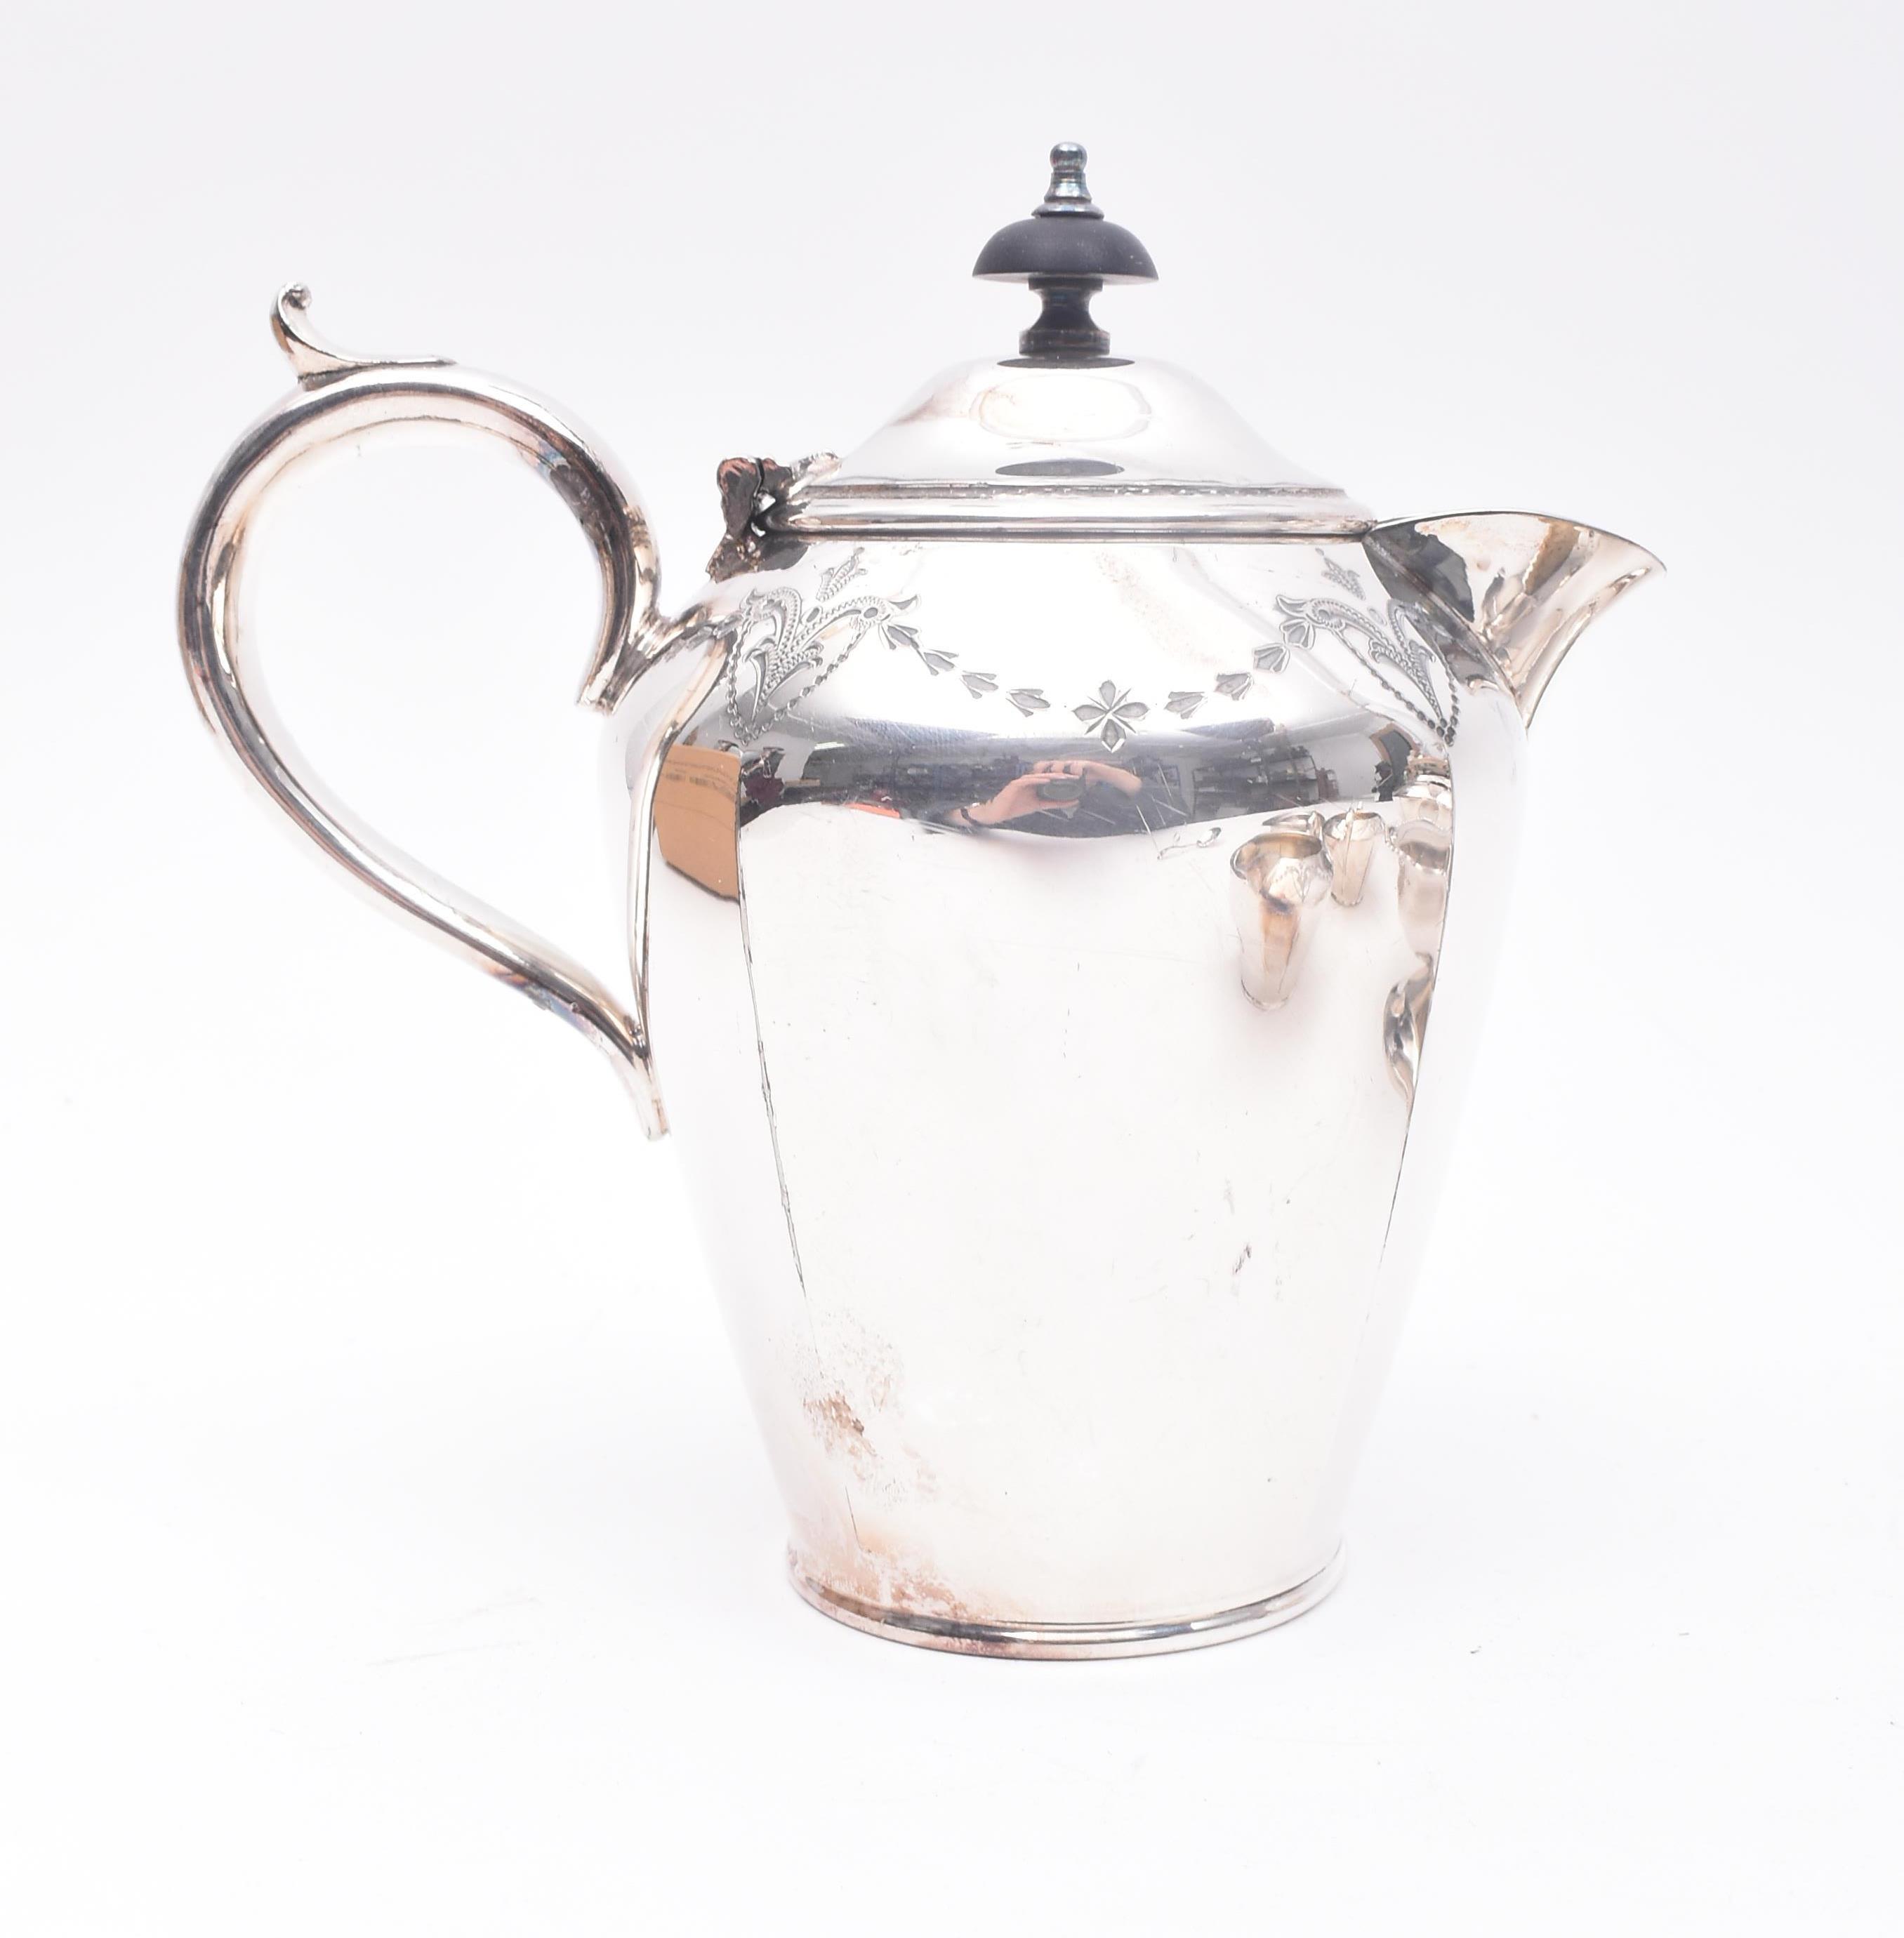 EARLY 20TH CENTURY SILVER PLATED TEA SERVICE WITH TEAPOT - Image 4 of 10